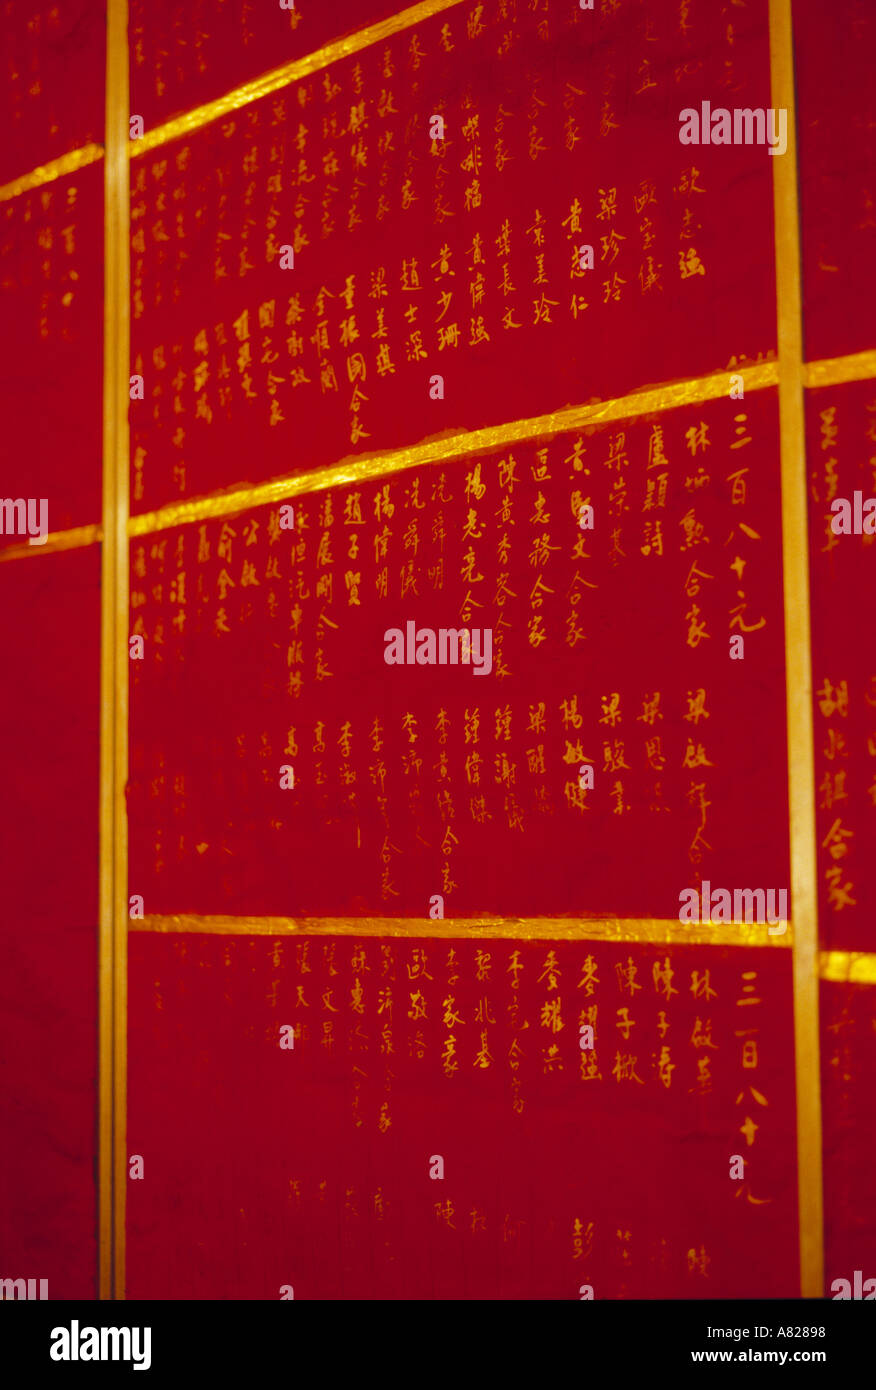 Names of donar for the temple in yaumatei temple complex lifestyle design graphic background kowloon hong kong china Stock Photo